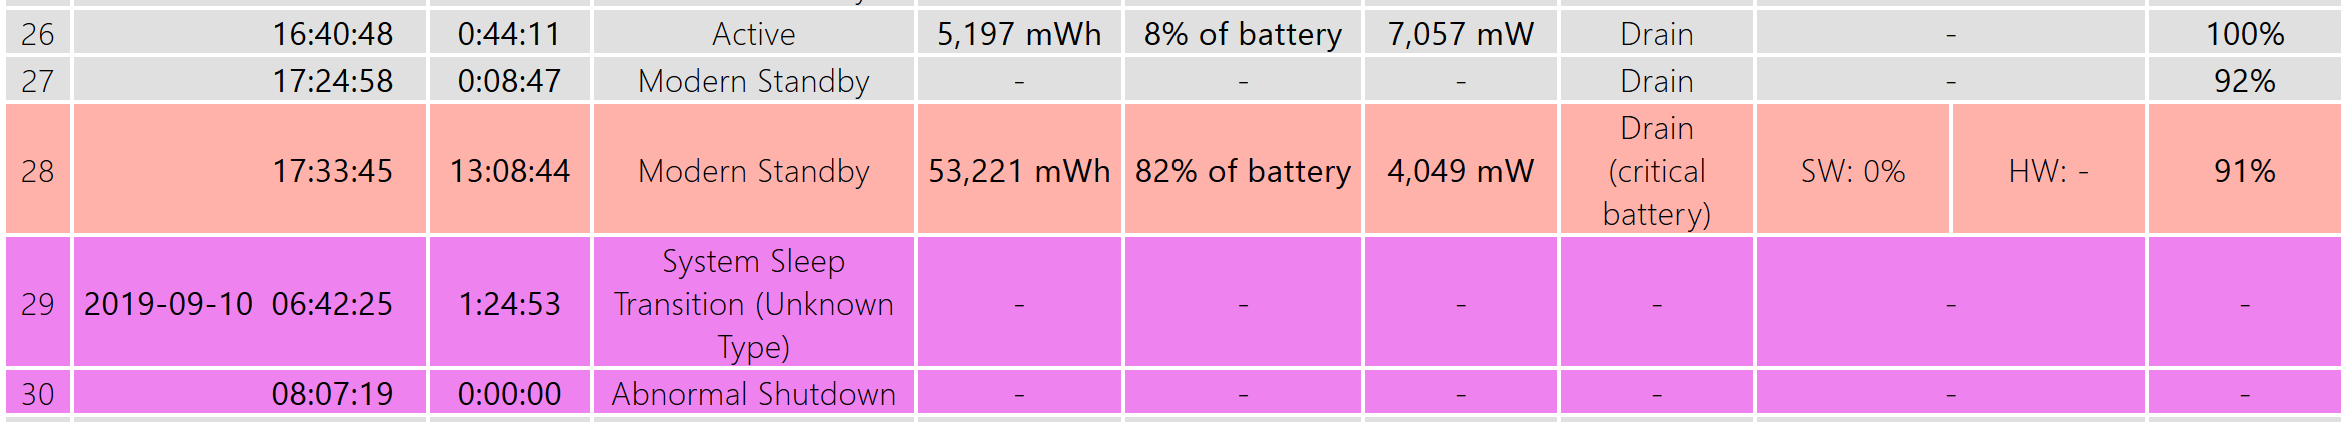 Section with 82% battery usage